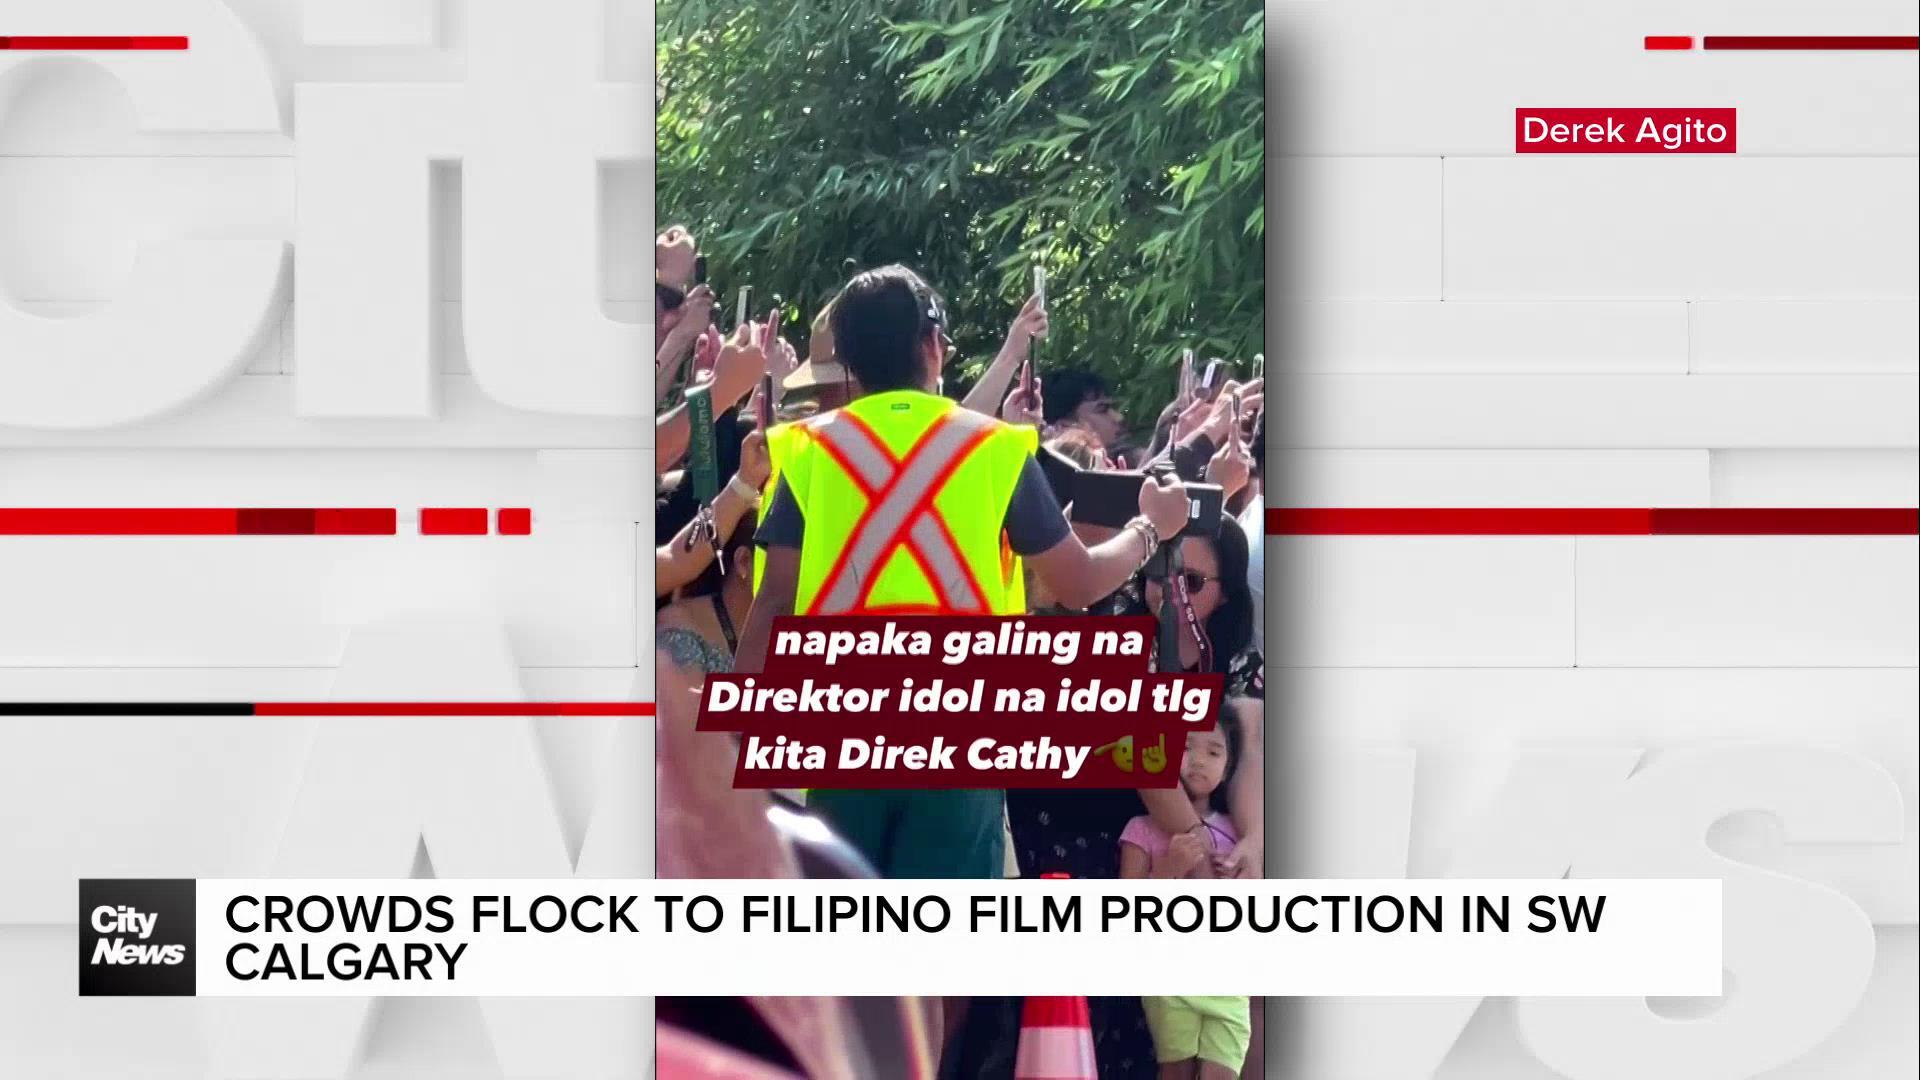 Crowds flock to Filipino film production in SW Calgary